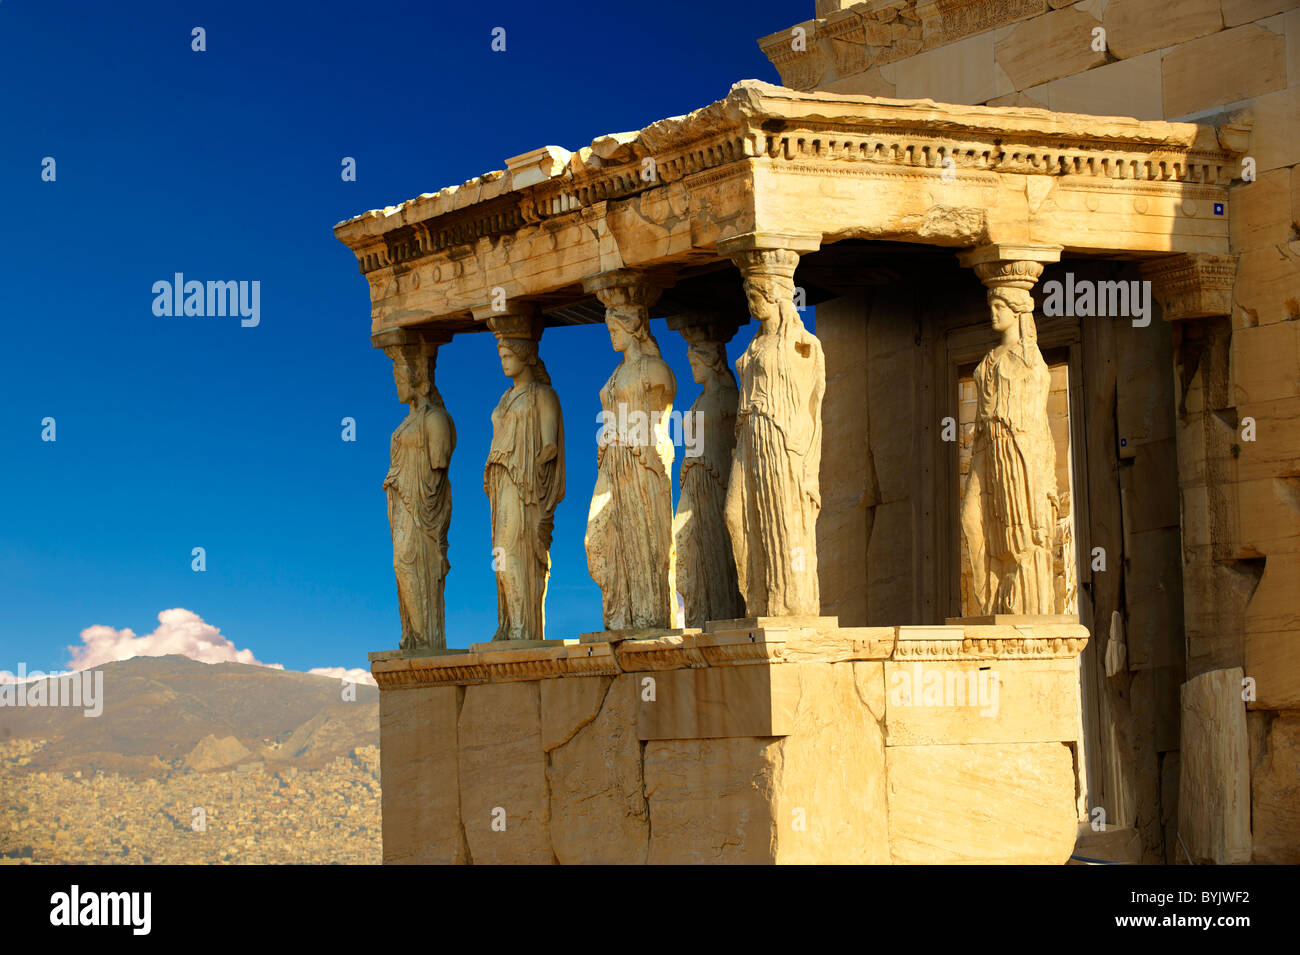 The Porch of the Caryatids. The Erechtheum, the Acropolis of Athens in Greece. Stock Photo